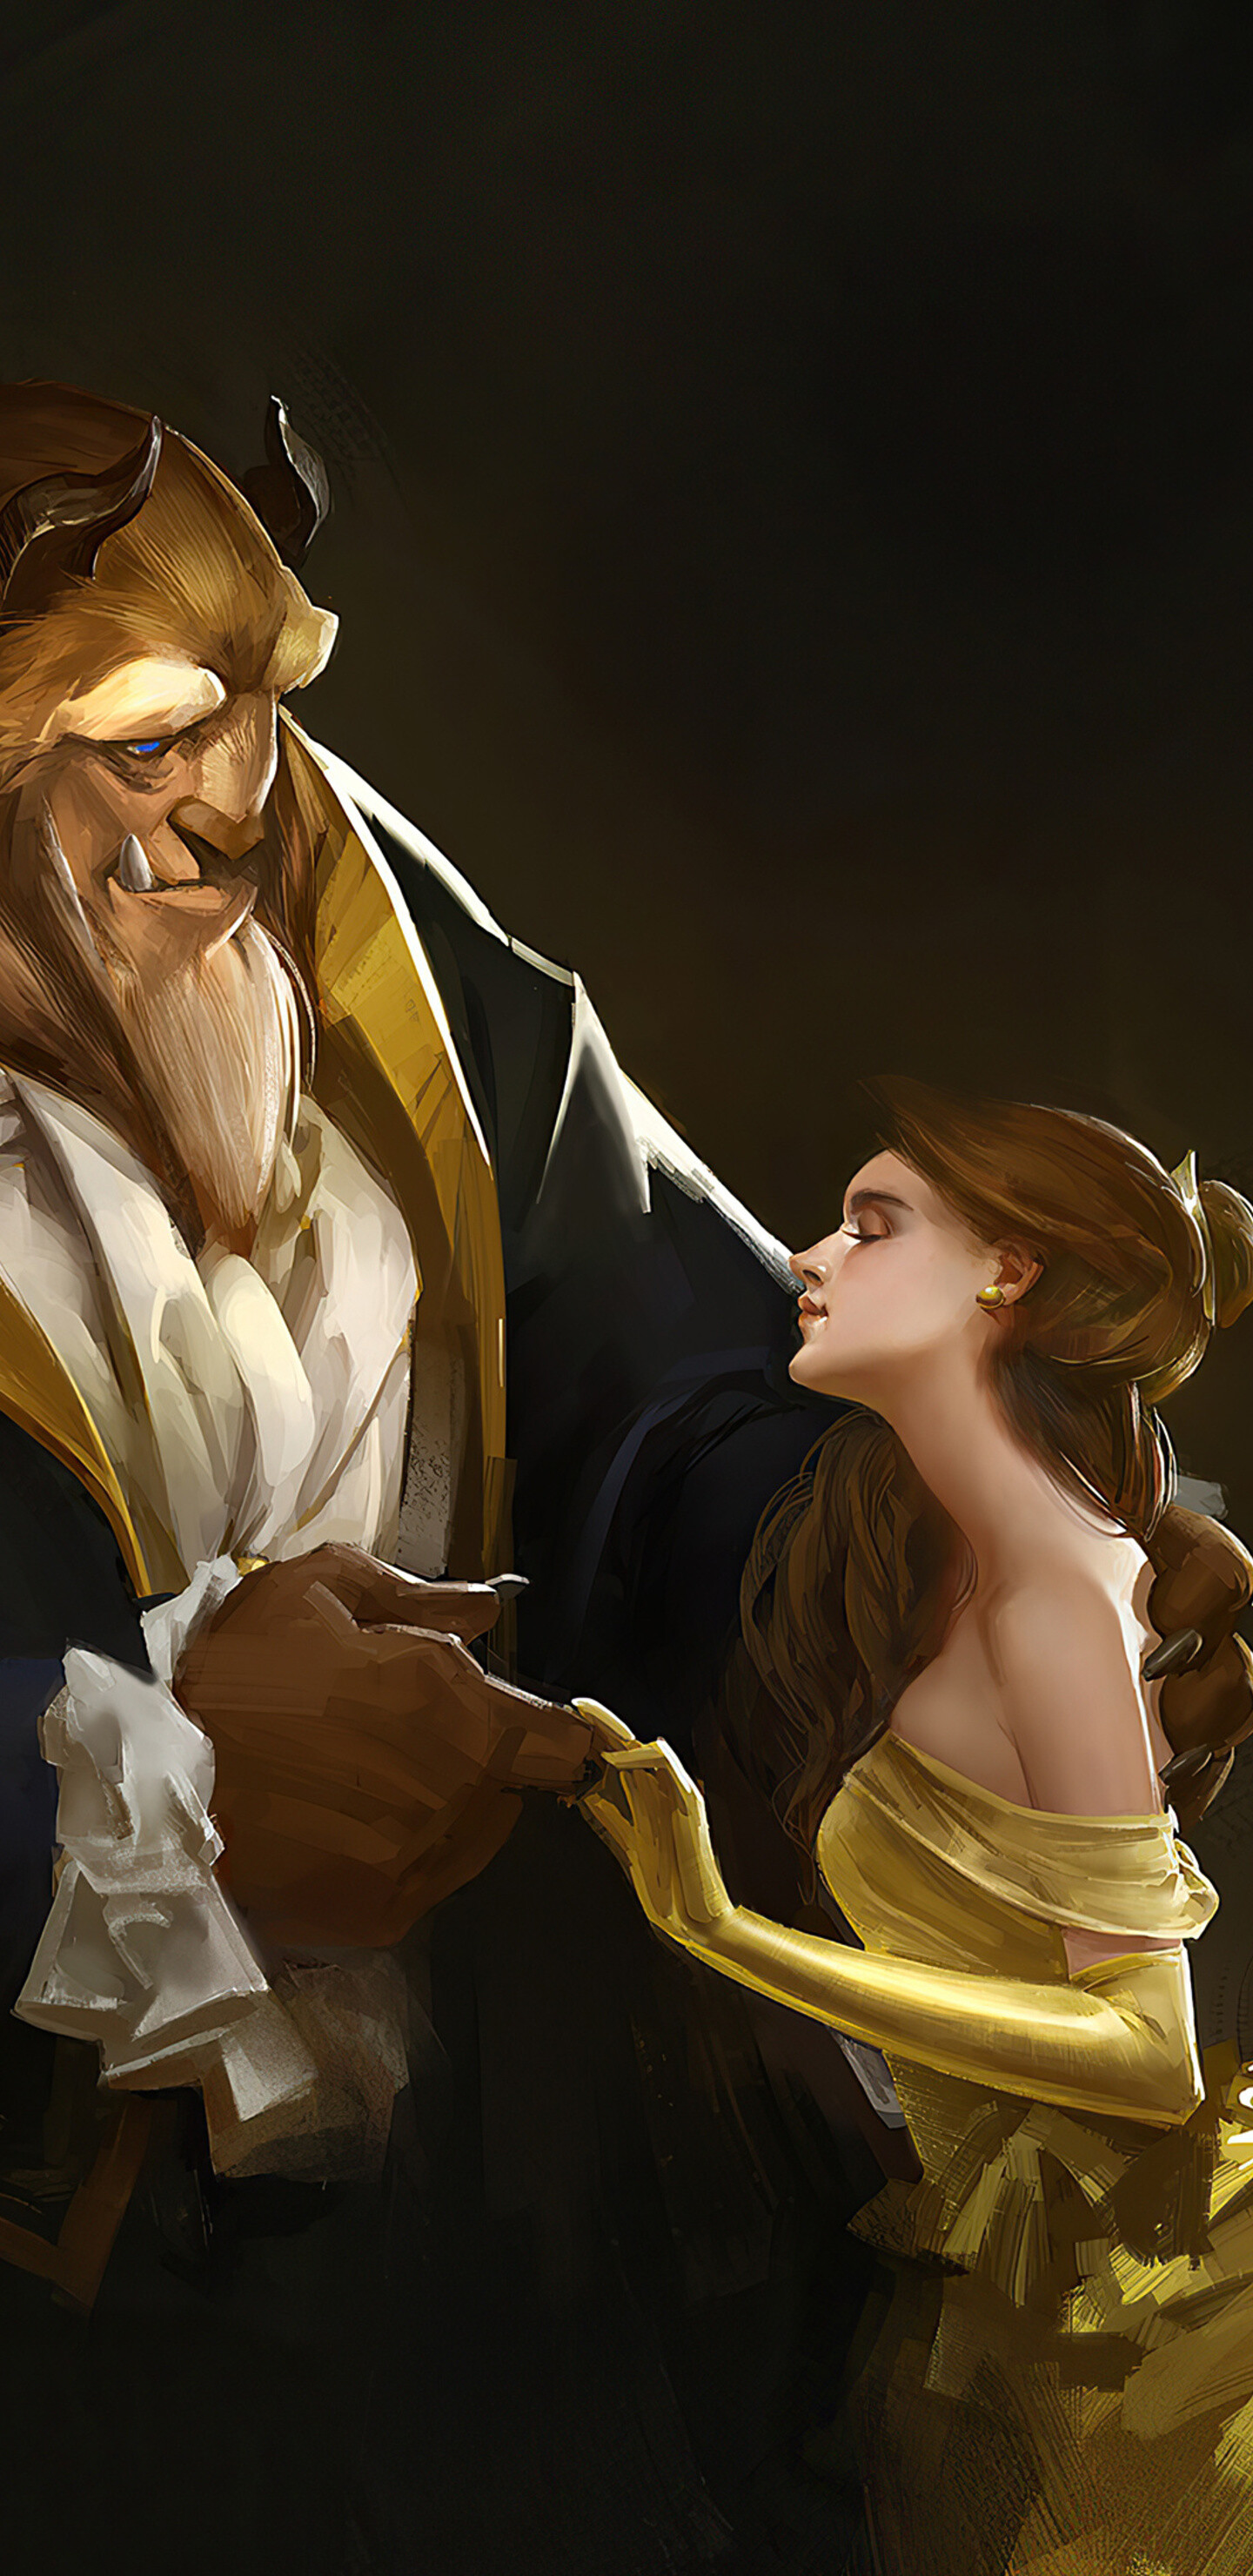 Beauty and the Beast: The fairy tale was influenced by Ancient Greek stories such as “Cupid and Psyche” from The Golden Ass. 1440x2960 HD Wallpaper.